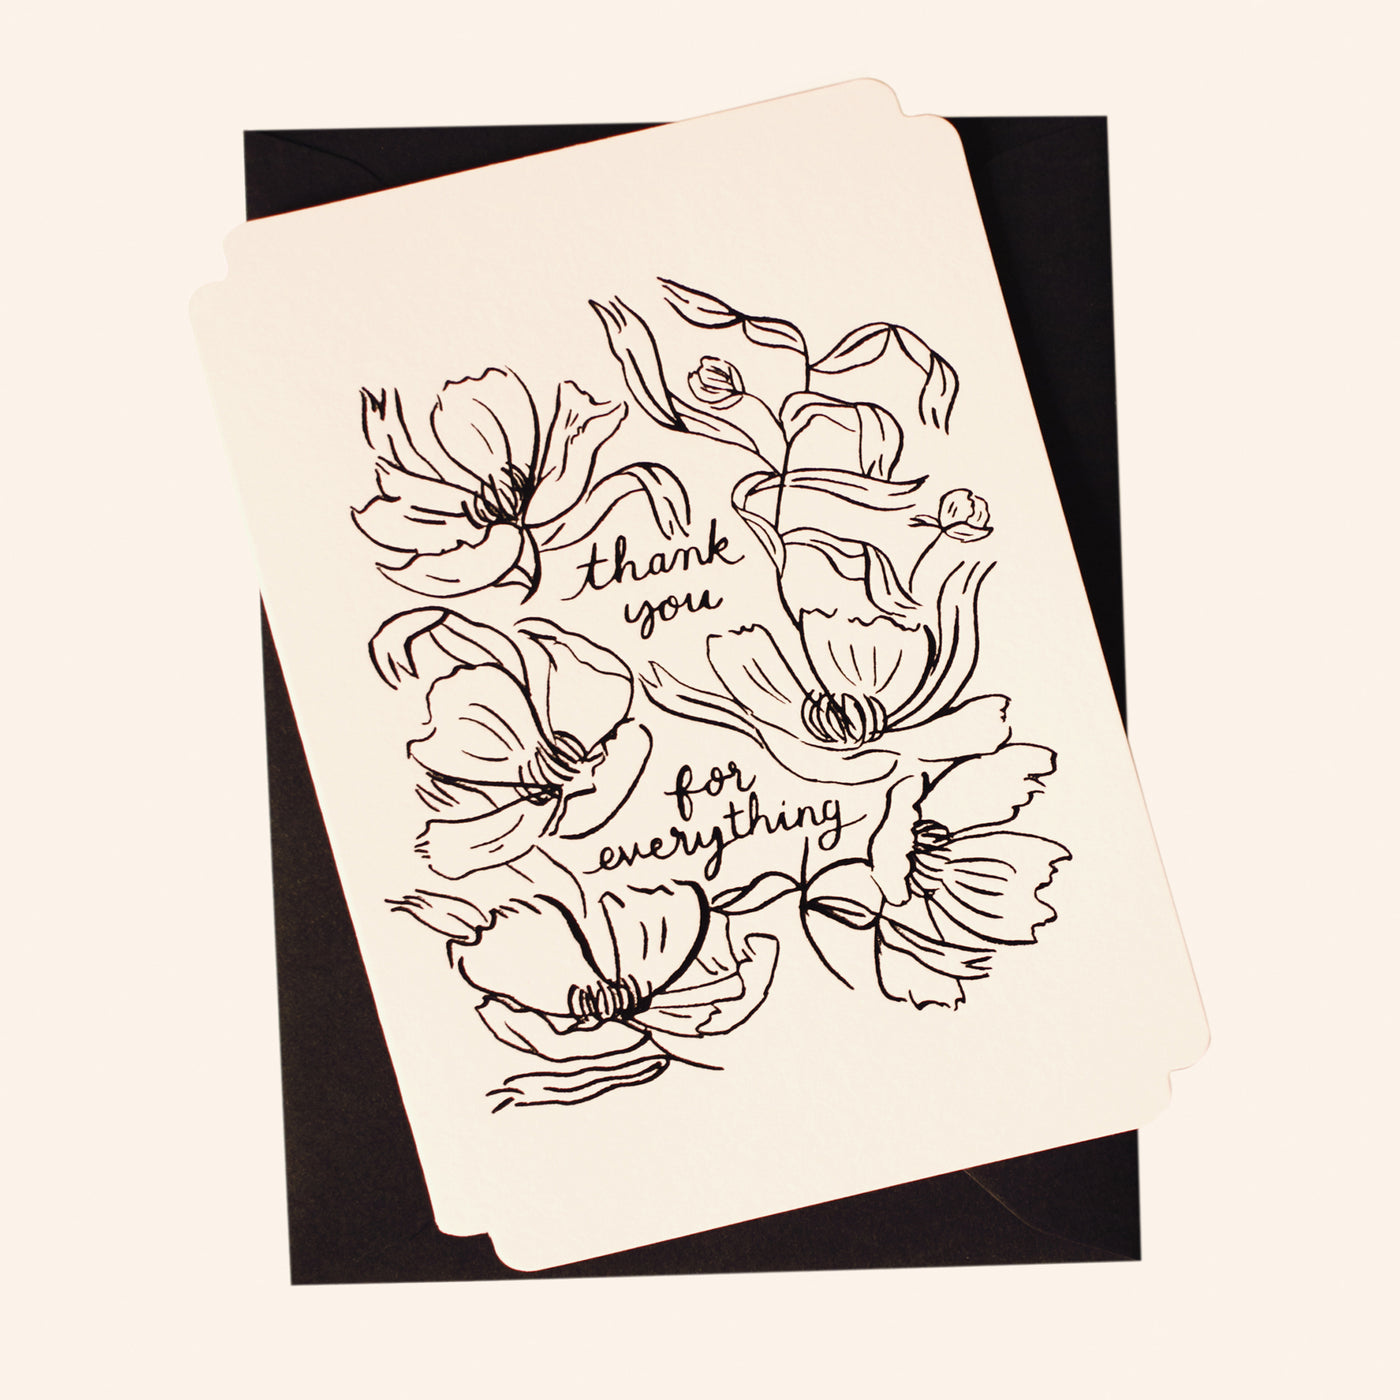 Black Floral Line Art Work A6 White Card  With The Words Thank You For Everything  Coupled With A Black Envelope - Annie Dornan Smith